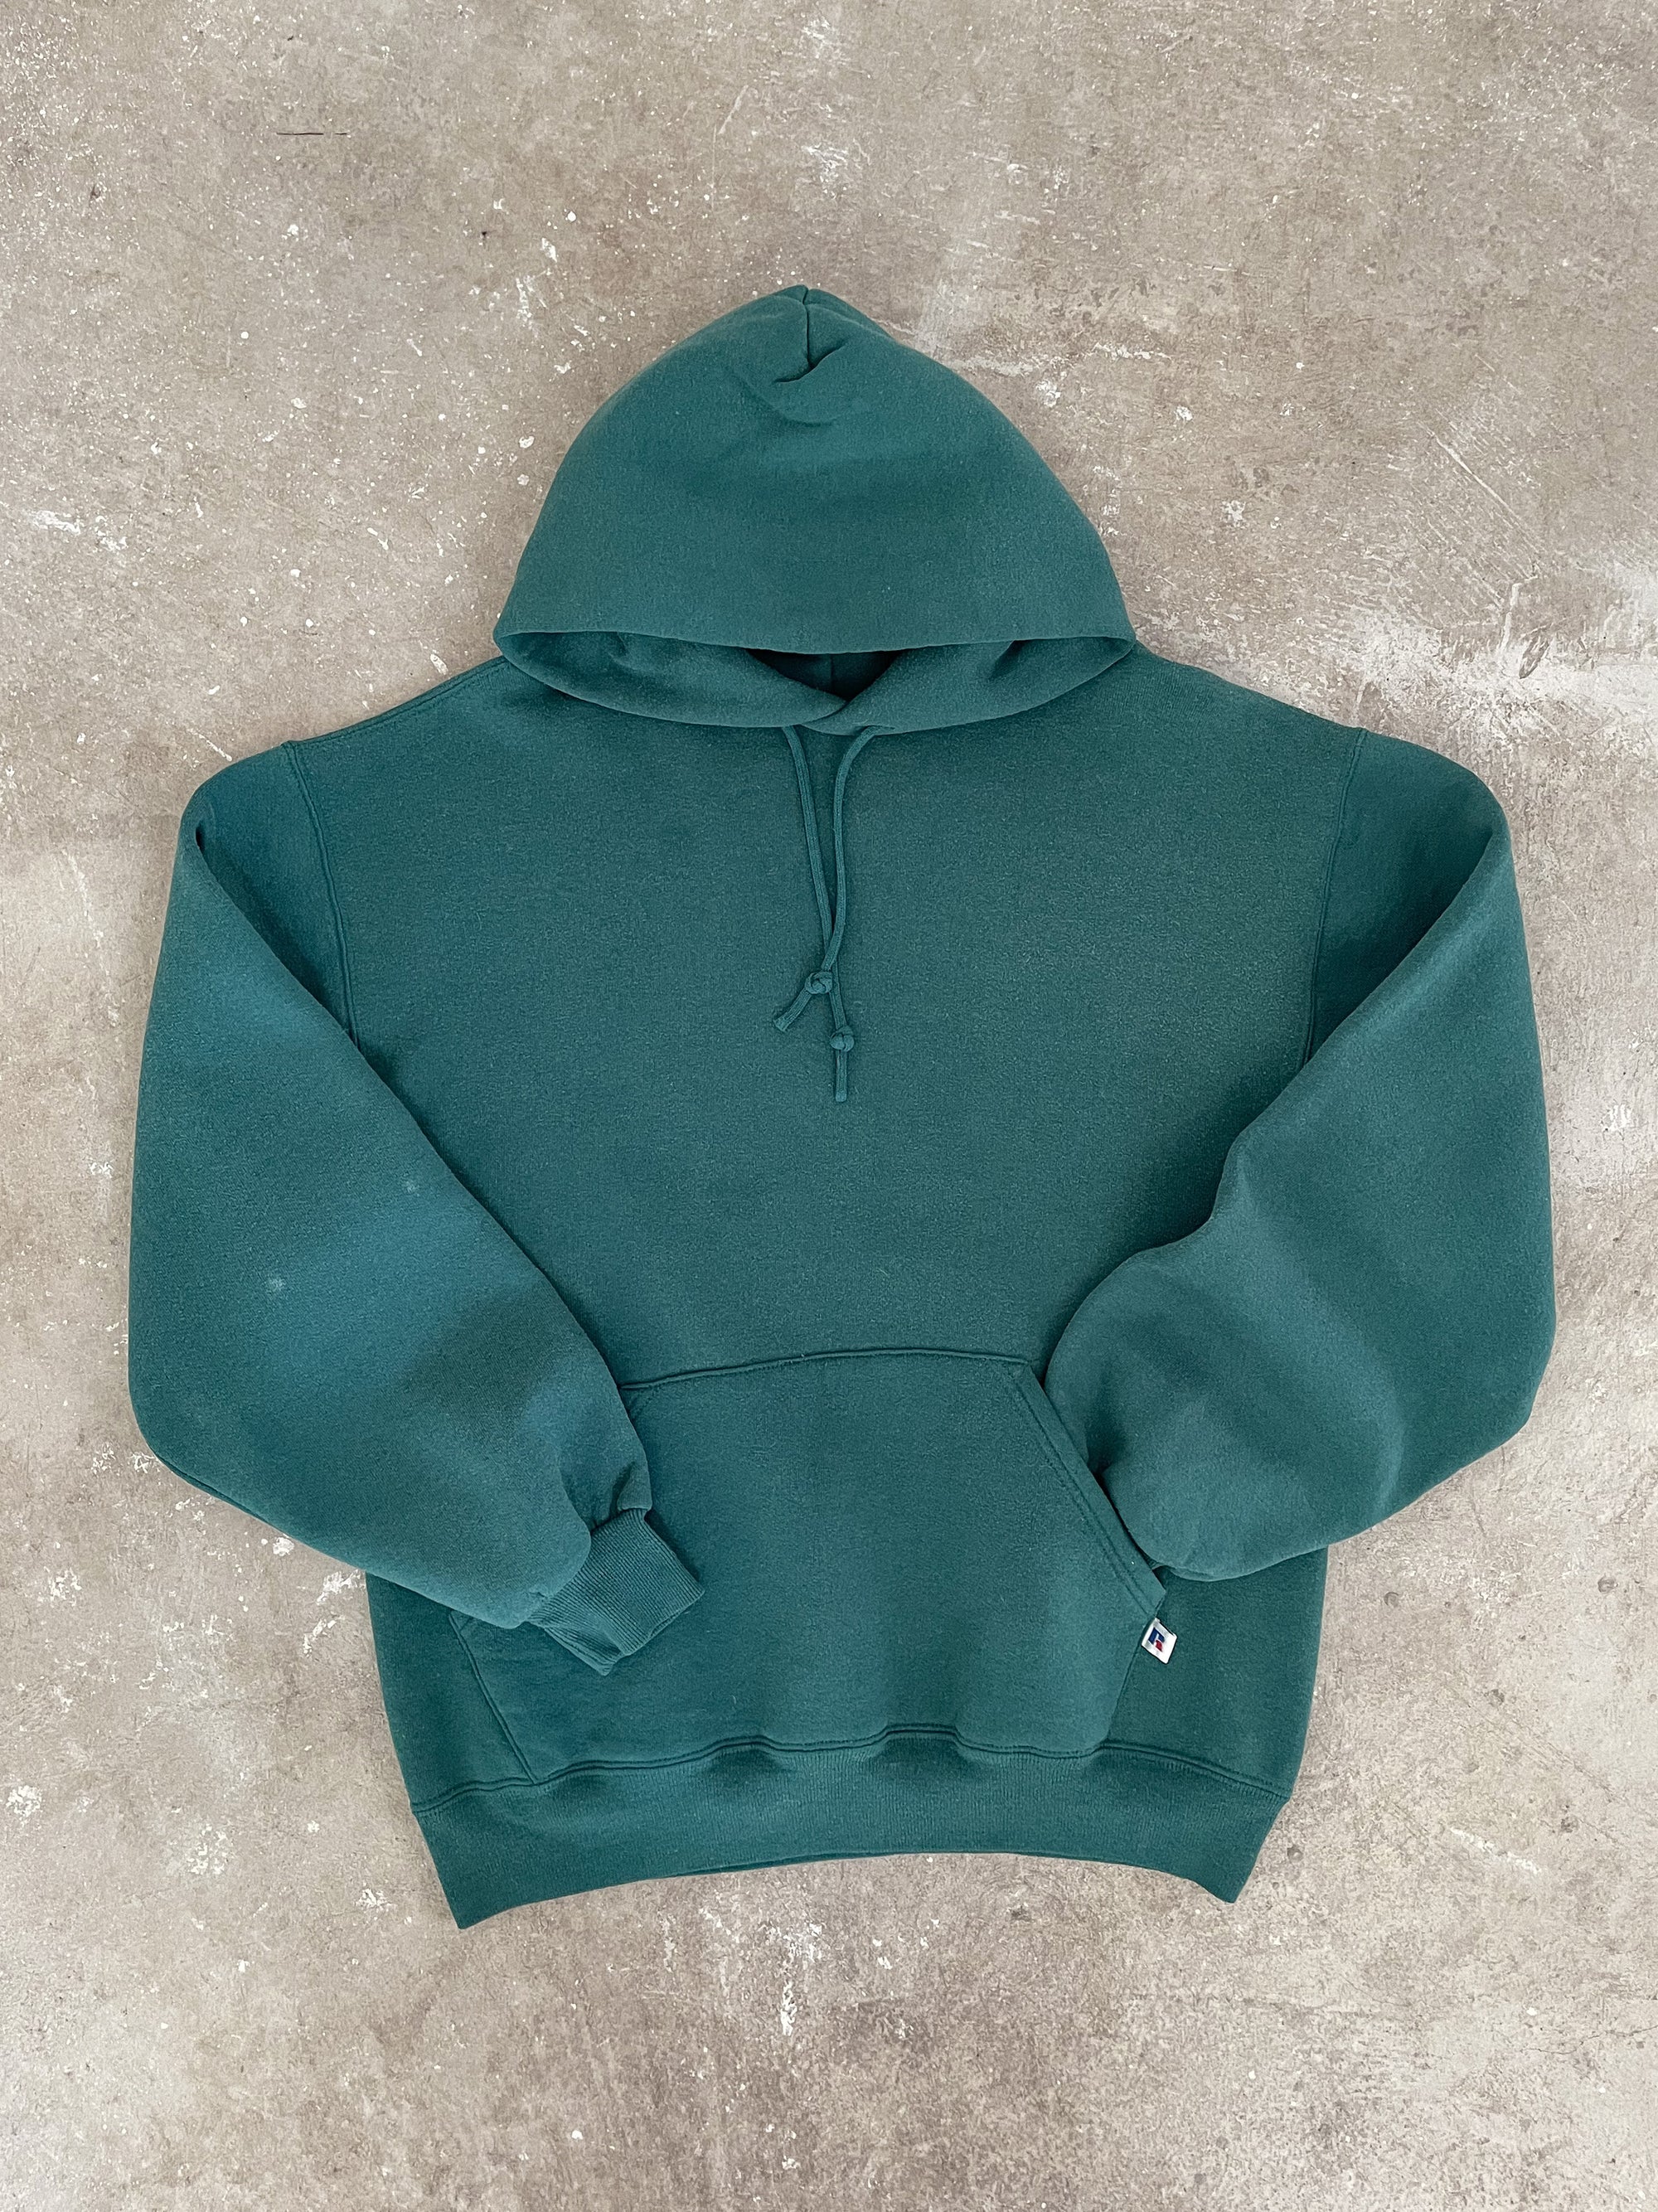 1990s Russell Faded Sea Green Hoodie (M)